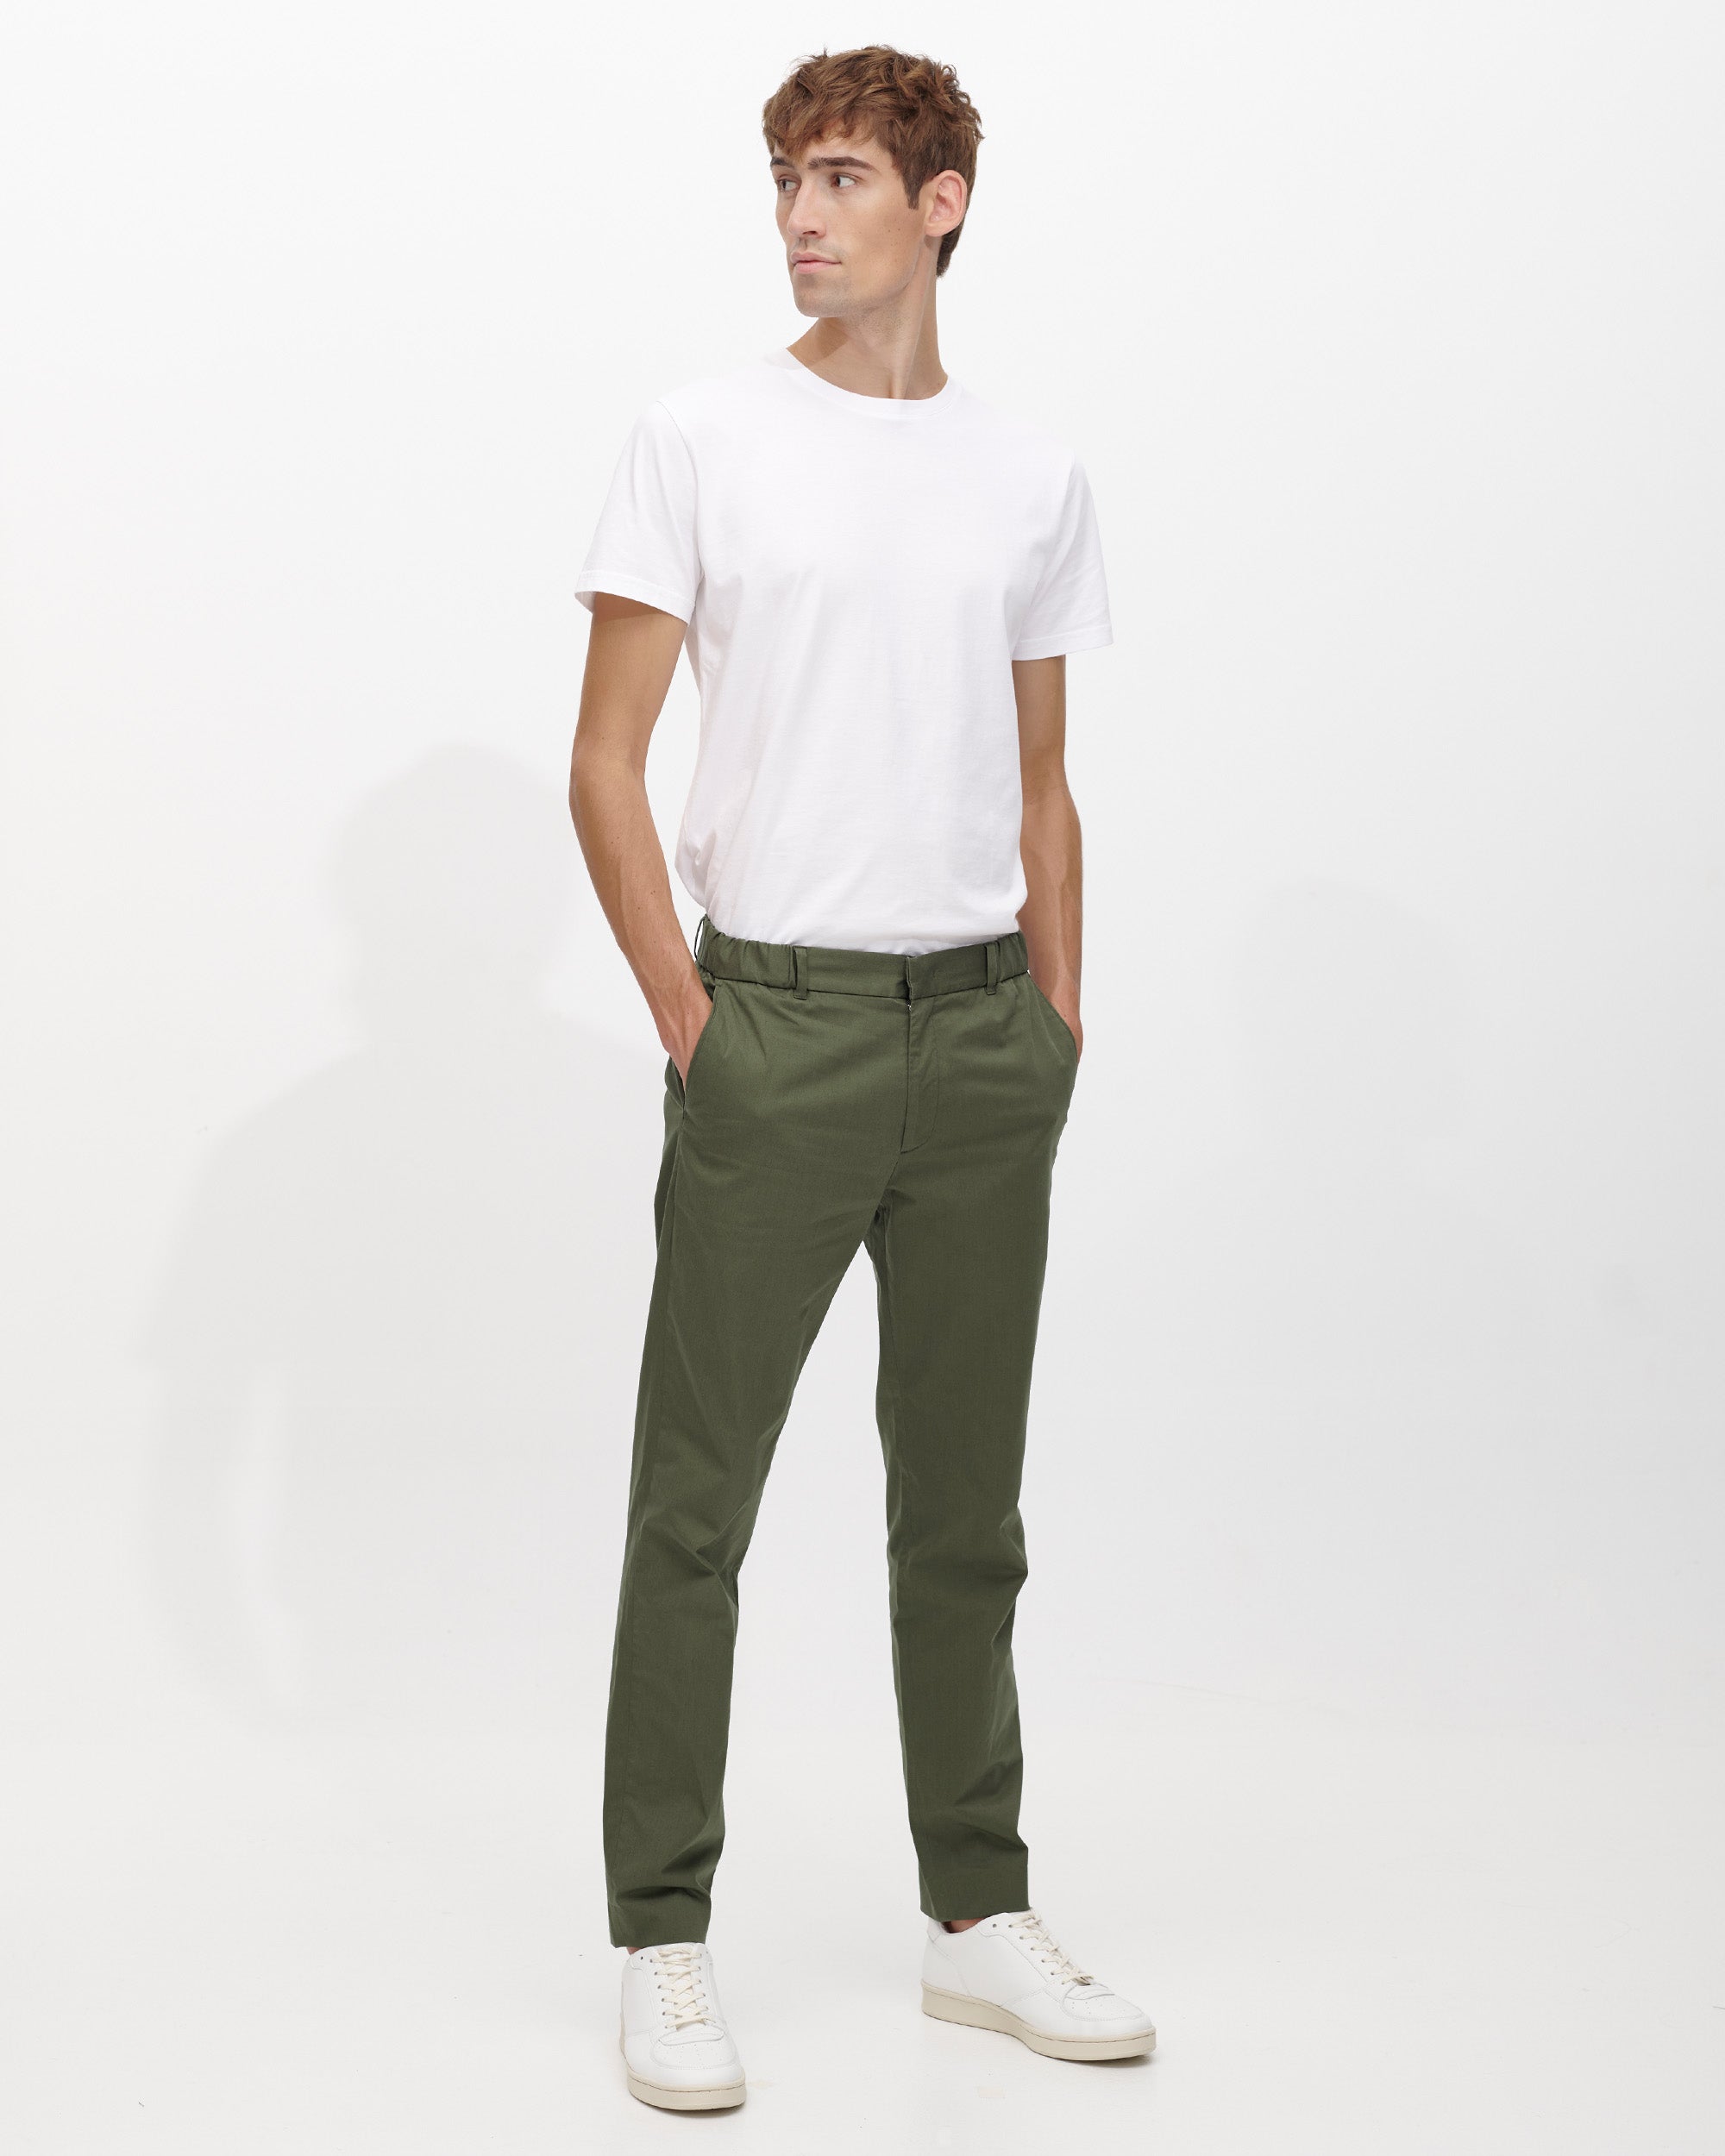 Olive Green Smart Chino for Men | Slim Fit, Stretch Cotton